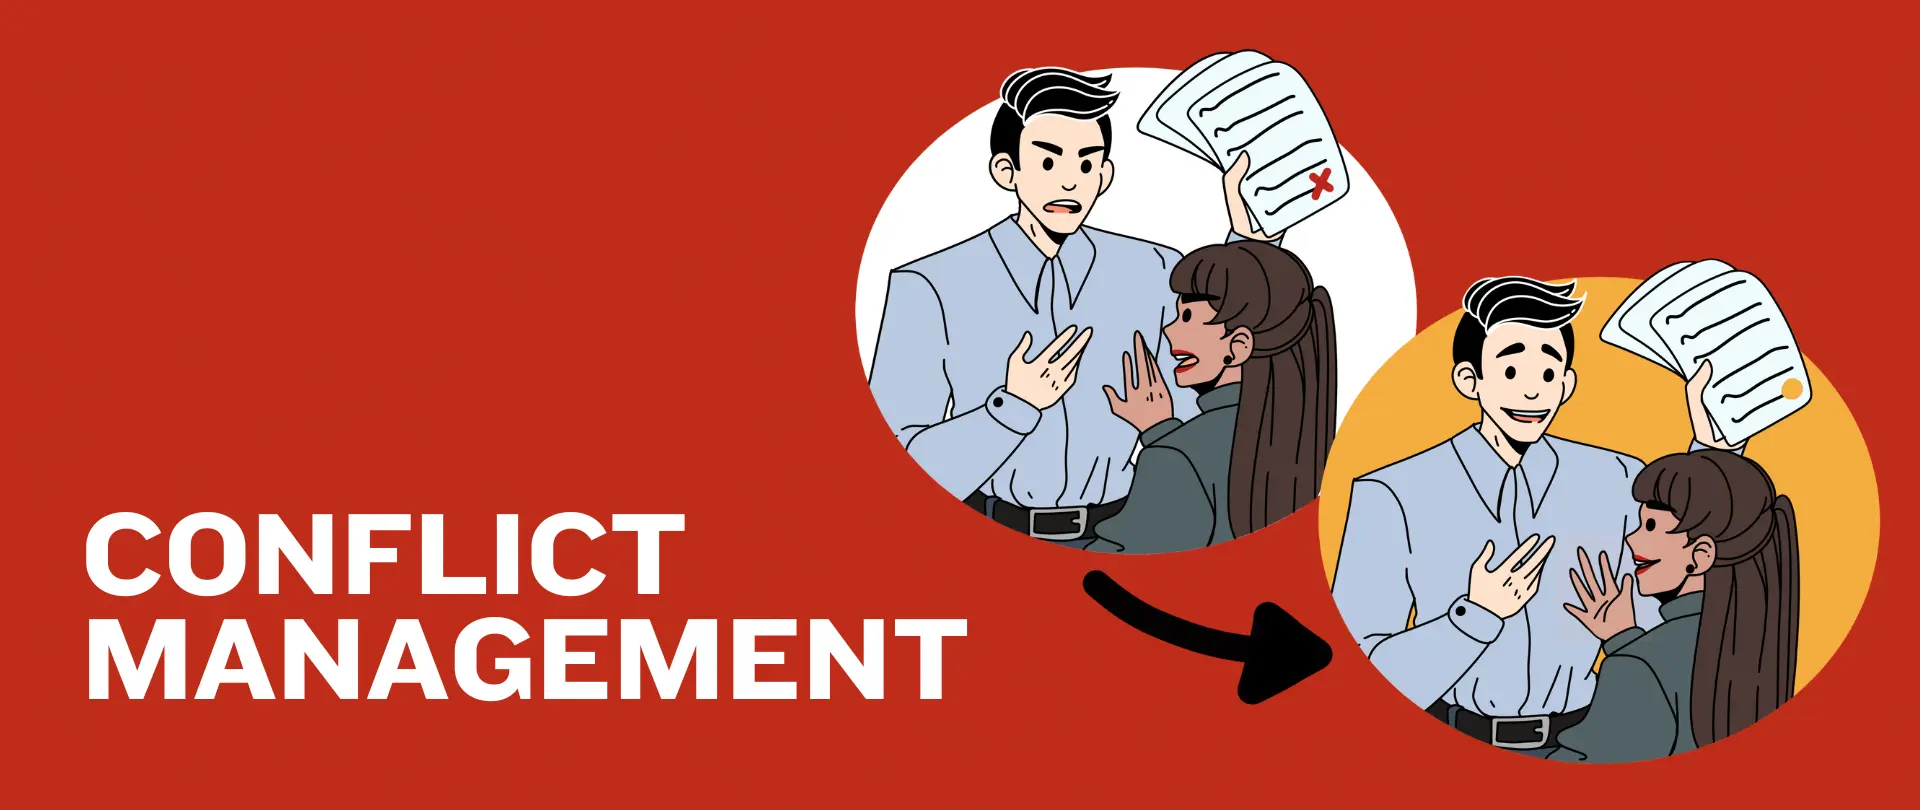 Illustration of two people going from having unproductive conflict to productive conflict, with the text "Conflict Management by Liane Davey"